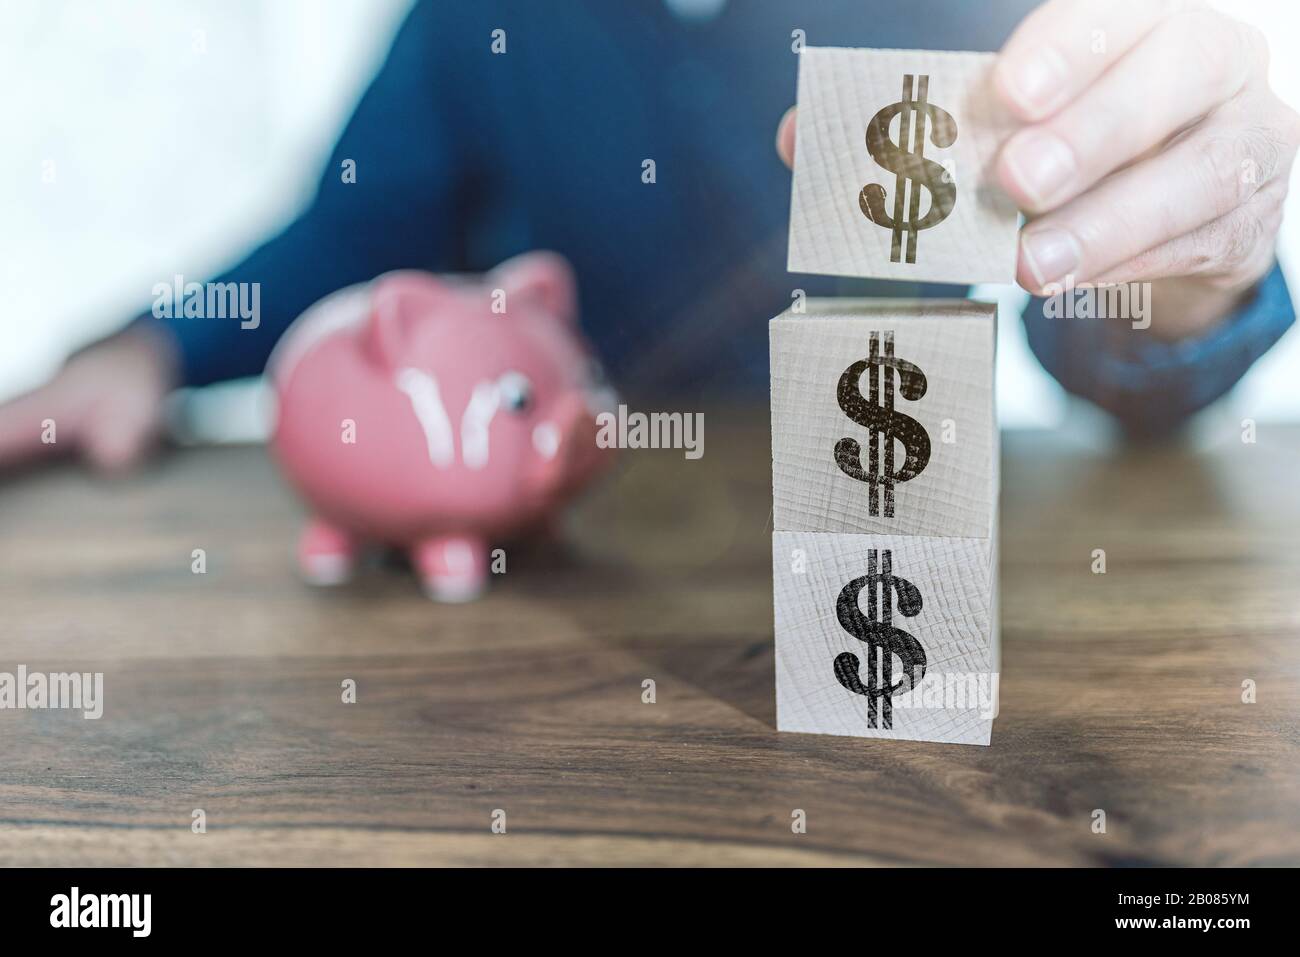 finance and investment concept with dollar symbols on wooden toy blocks Stock Photo